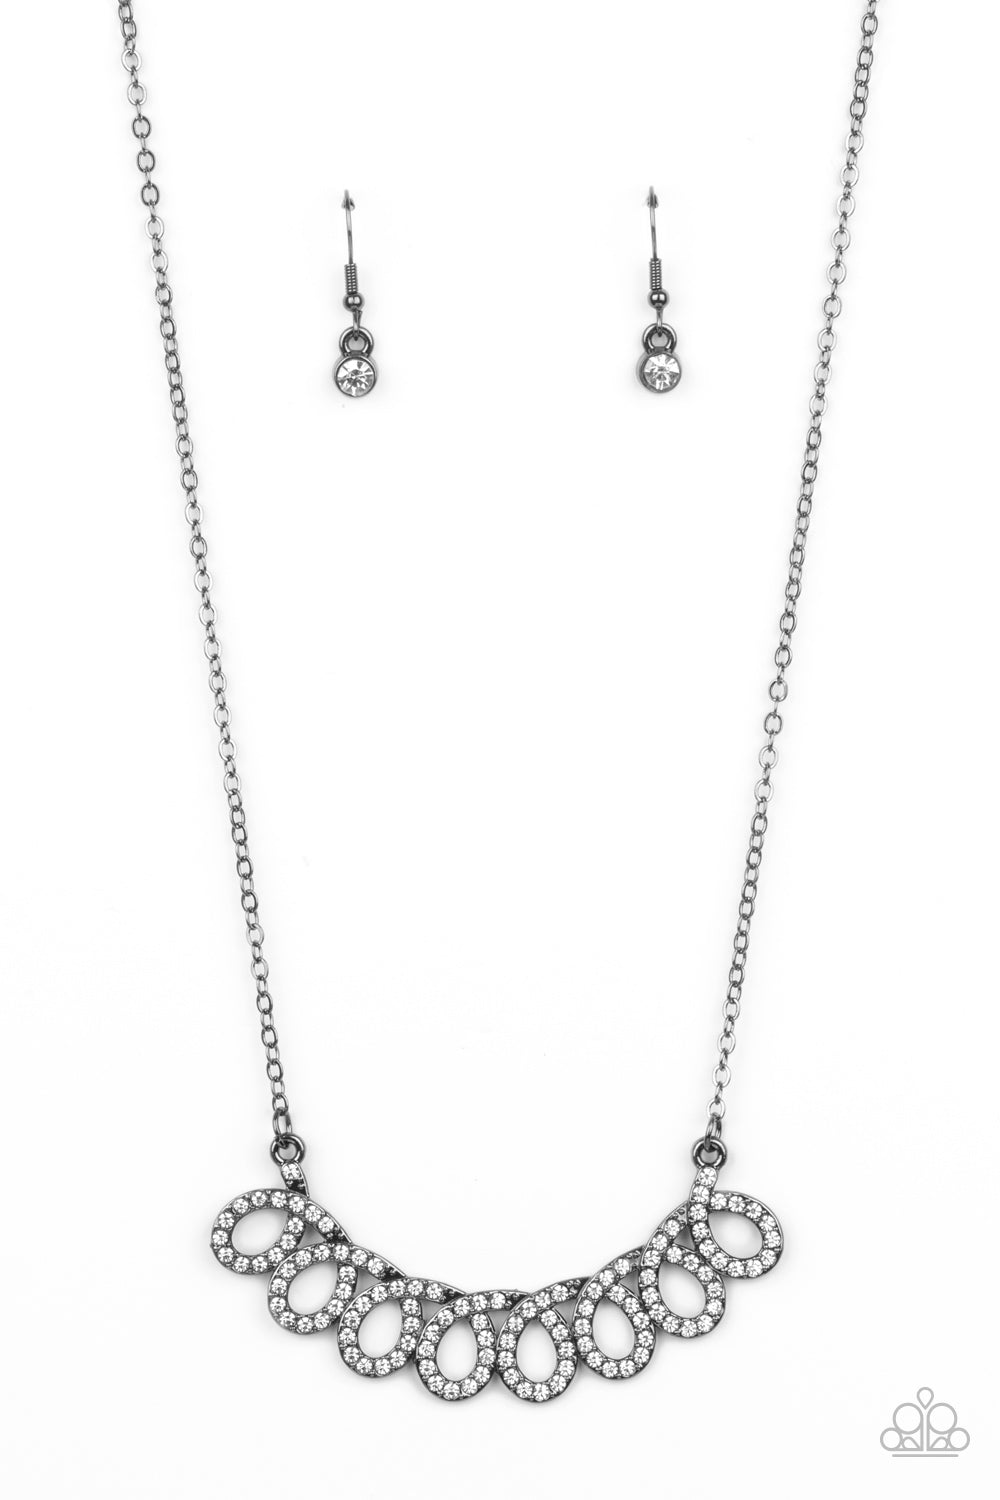 Paparazzi Timeless Trimmings - Black Necklace - A Finishing Touch Jewelry